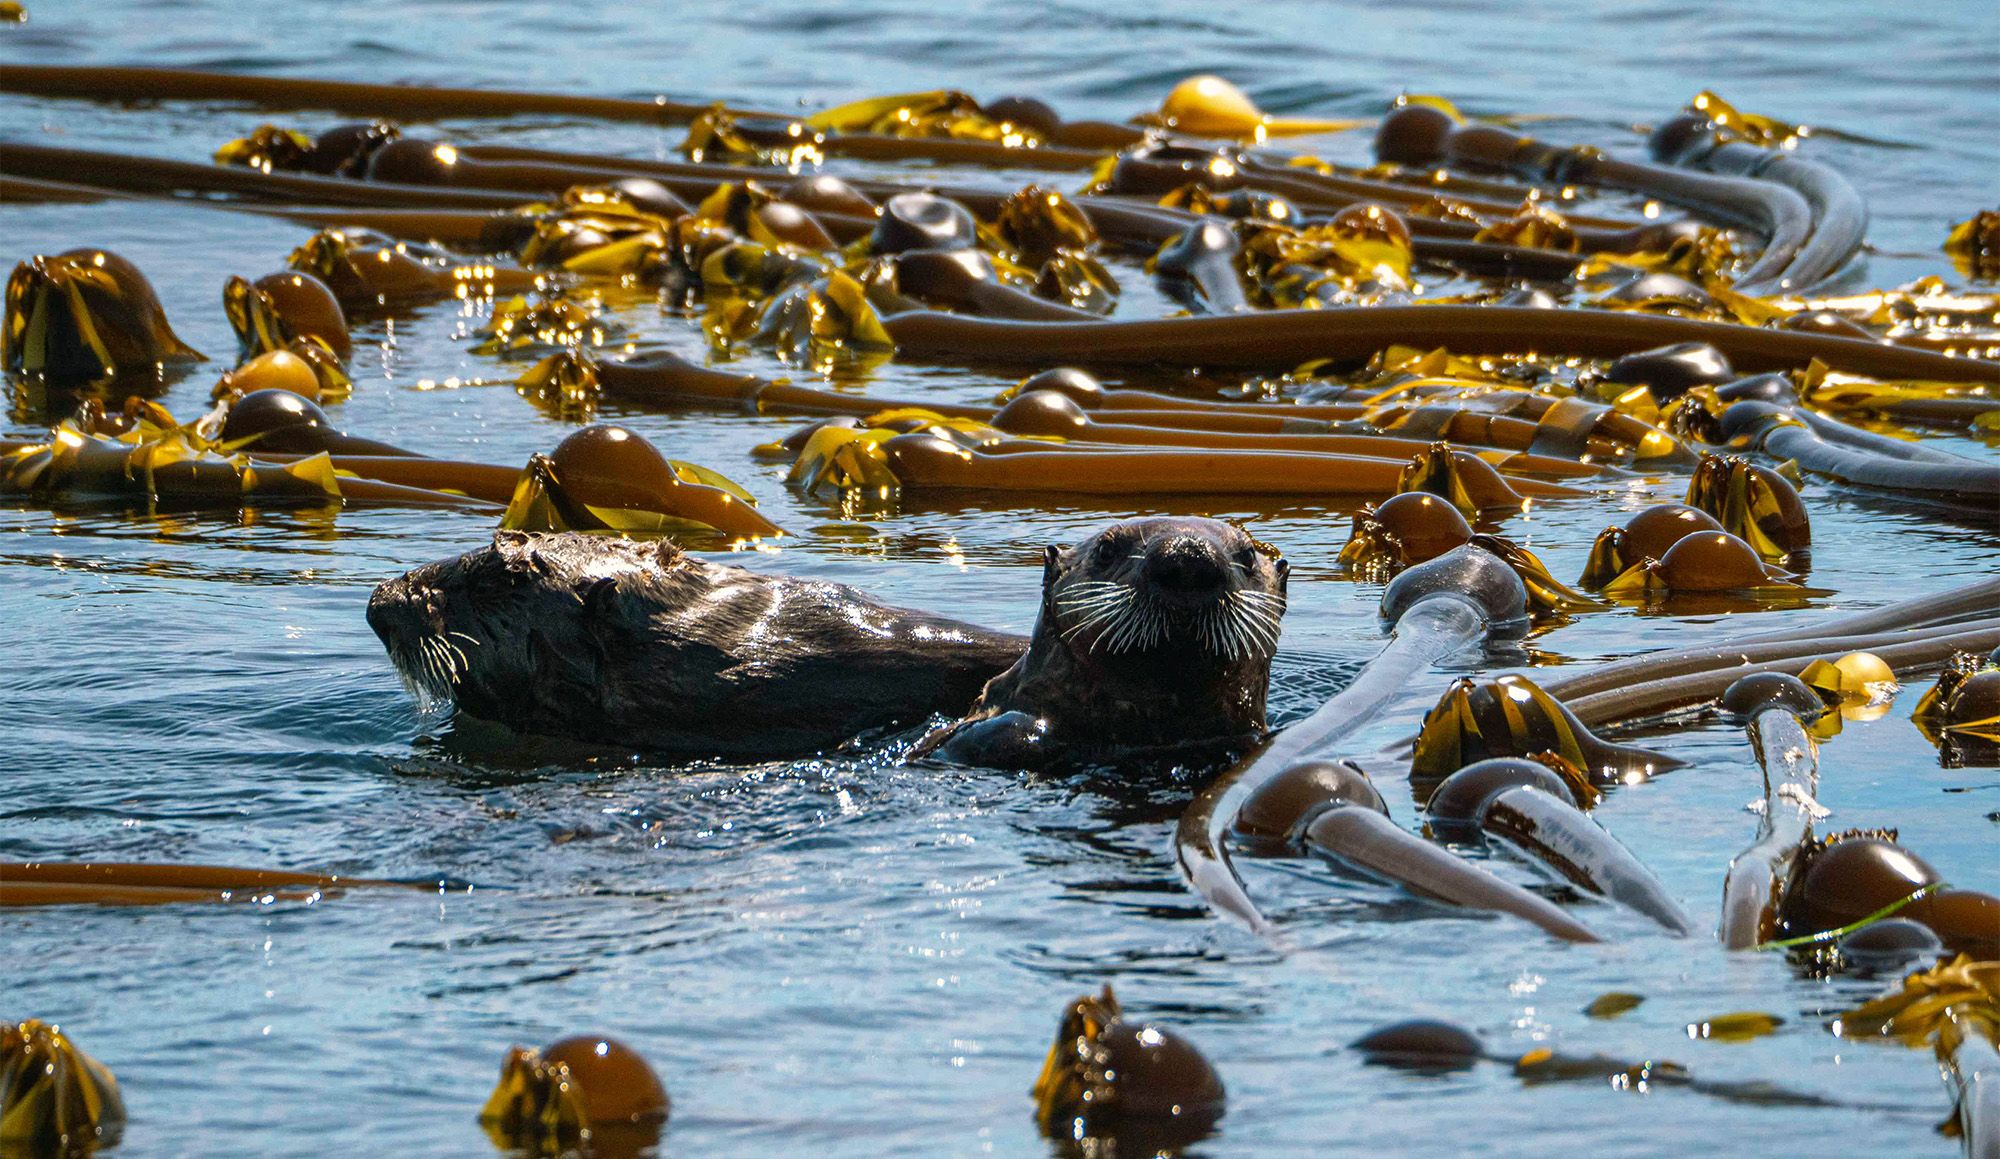 A view of the ocean surface covered in kelp, with two otters swimming amongst it. One otter is looking at the camera.